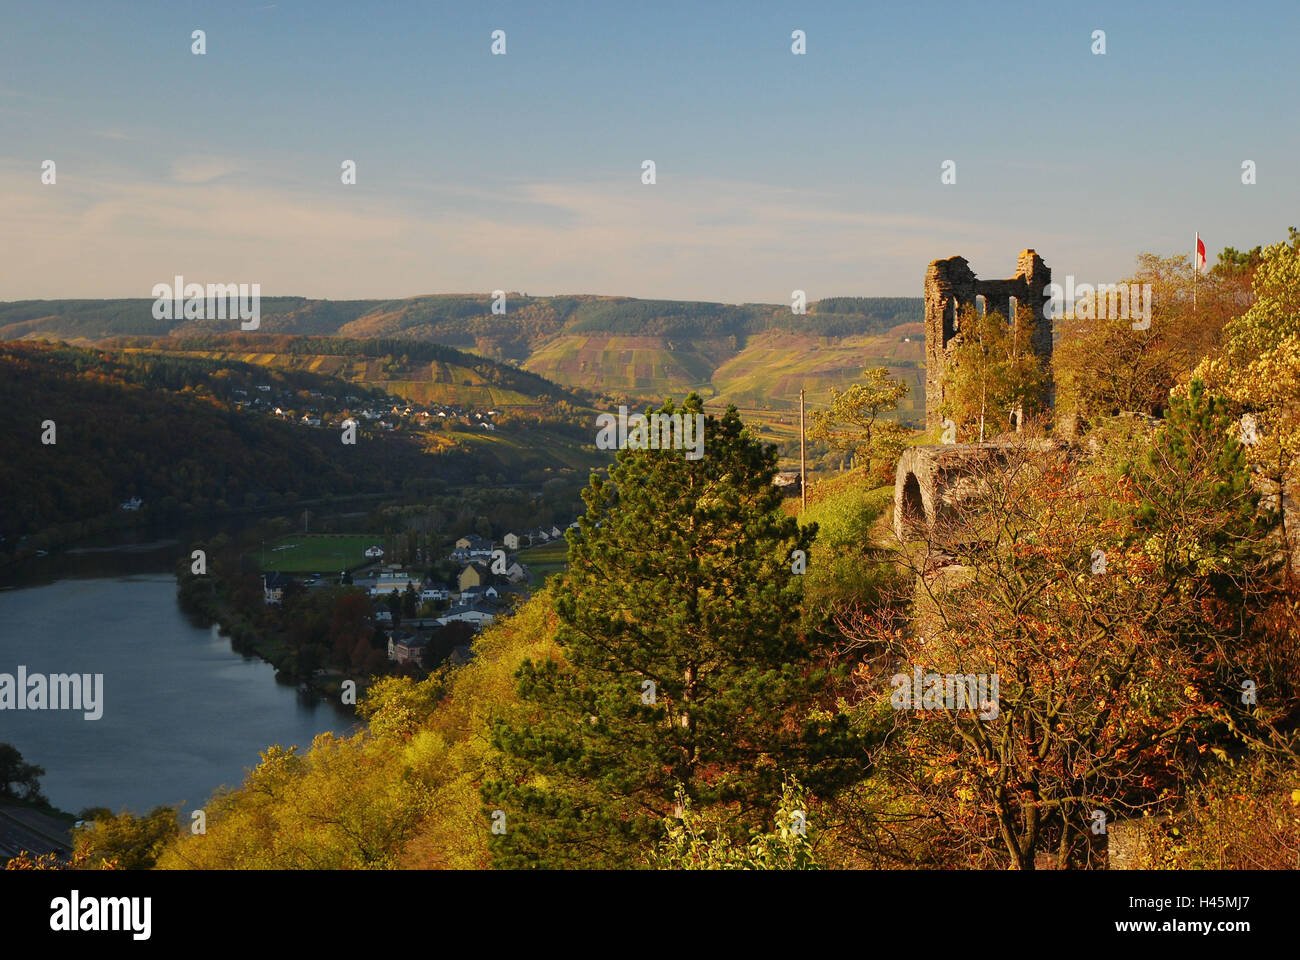 Germany, Rhineland-Palatinate, the Moselle, Traben-Trarbach, view from the castle Greven, vineyards, autumn, Stock Photo